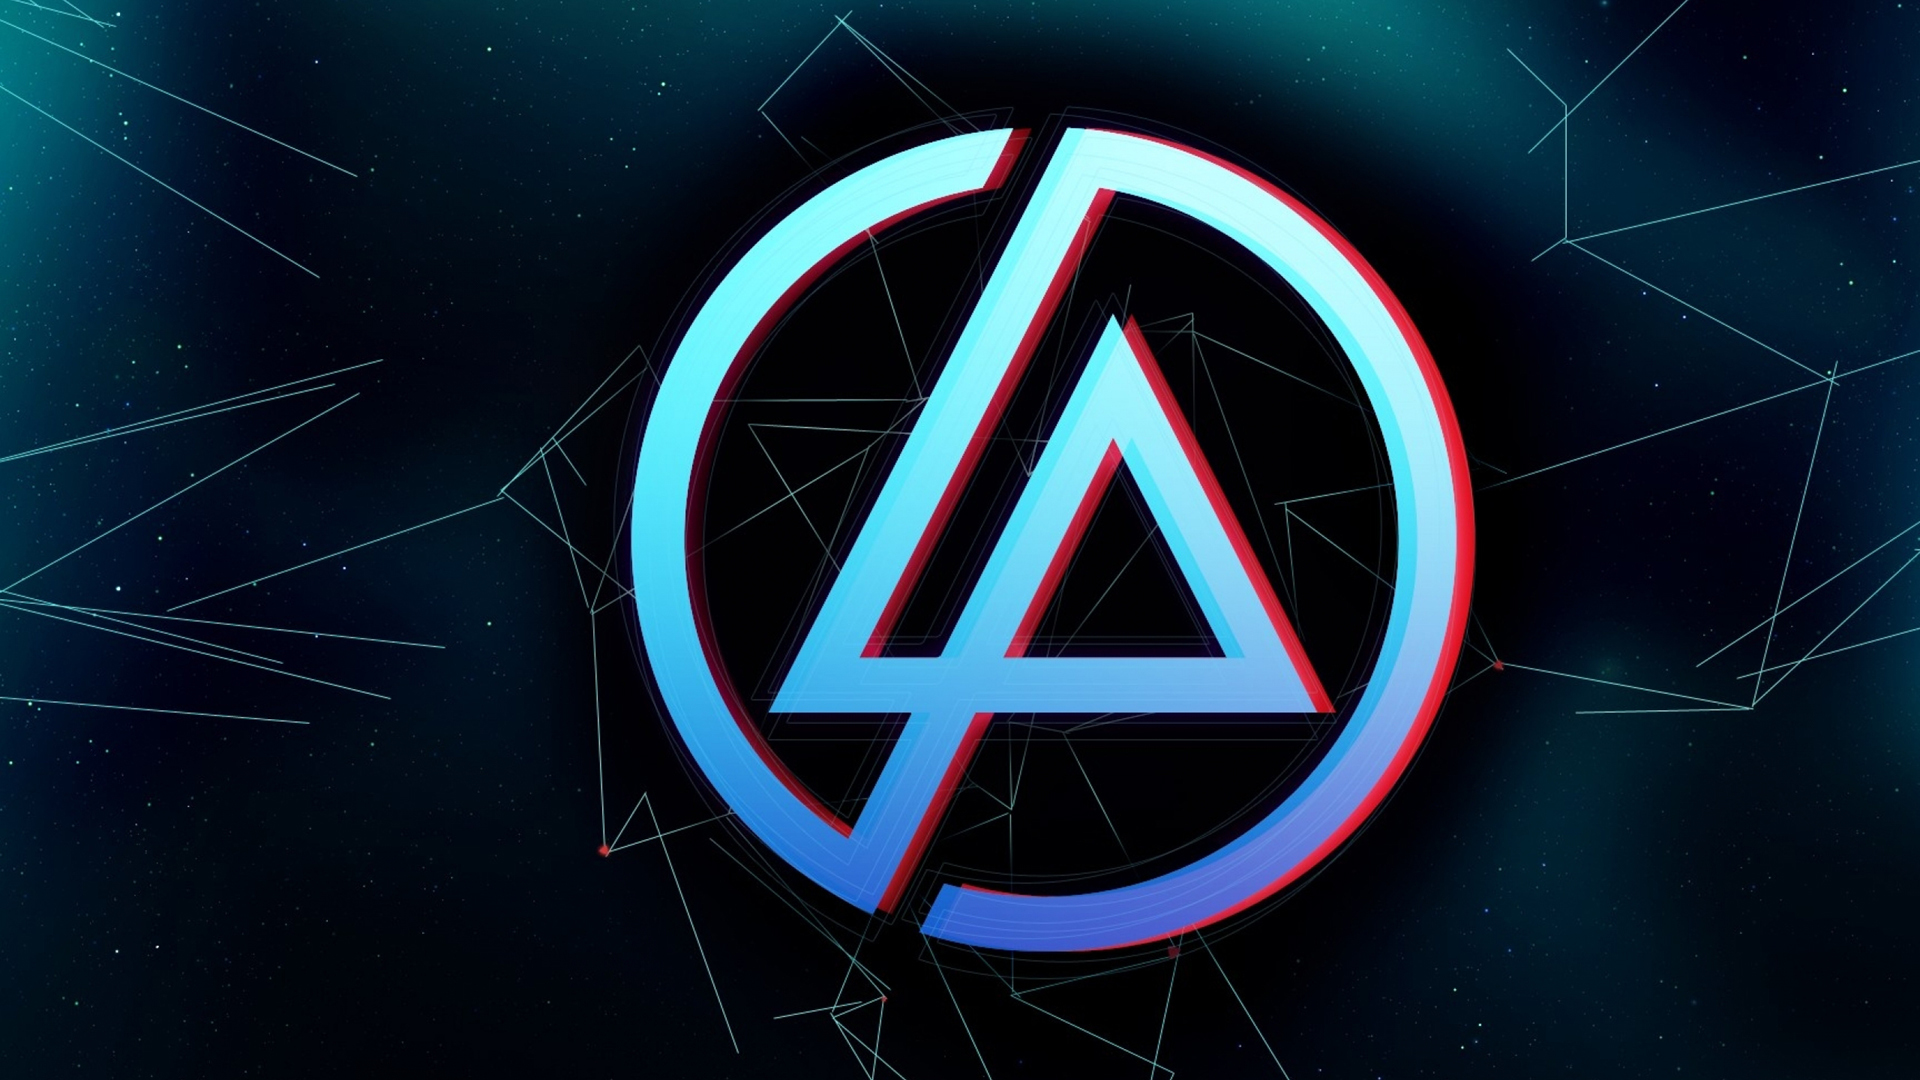 Linkin Park Wallpapers Images Photos Pictures Backgrounds